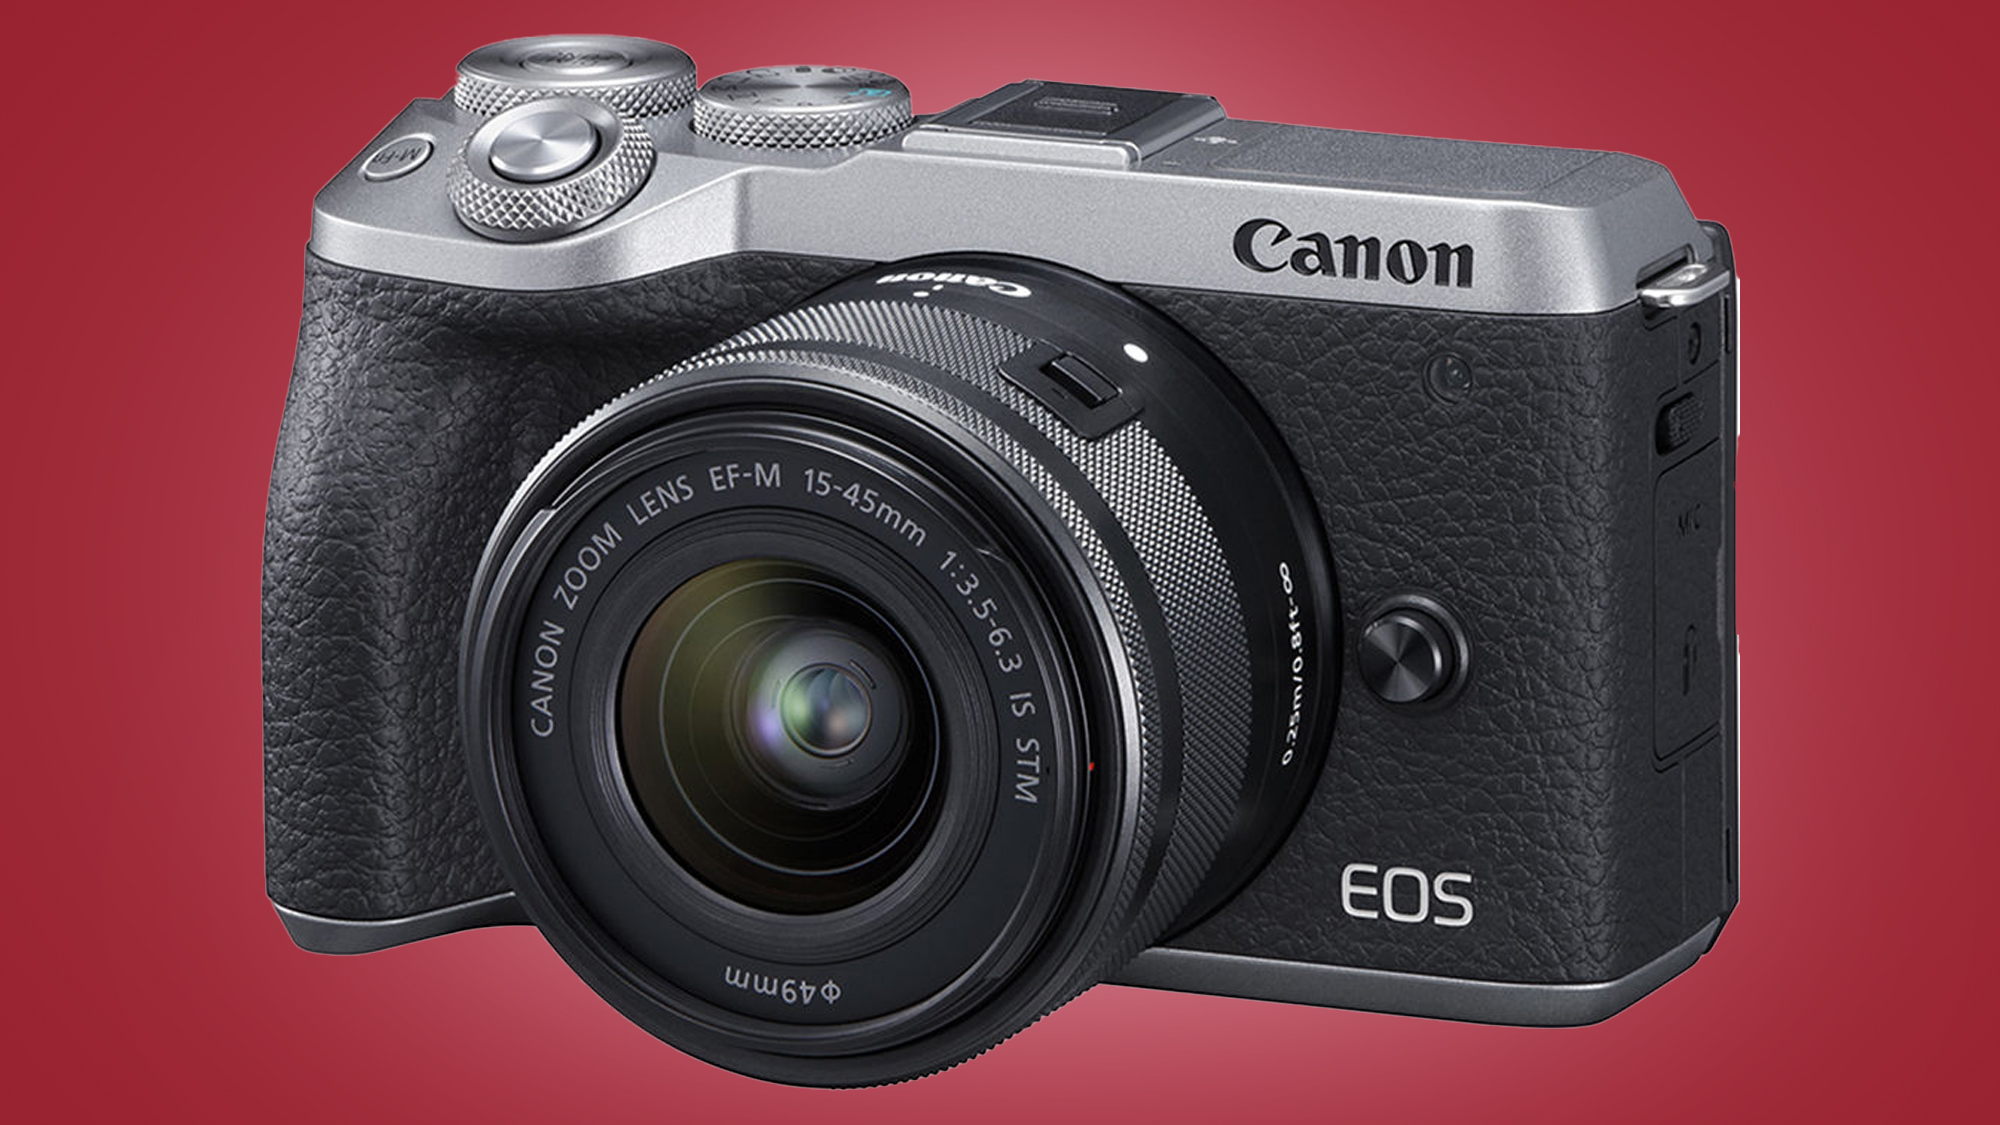 The Canon EOS M6 Mark II camera on a red background